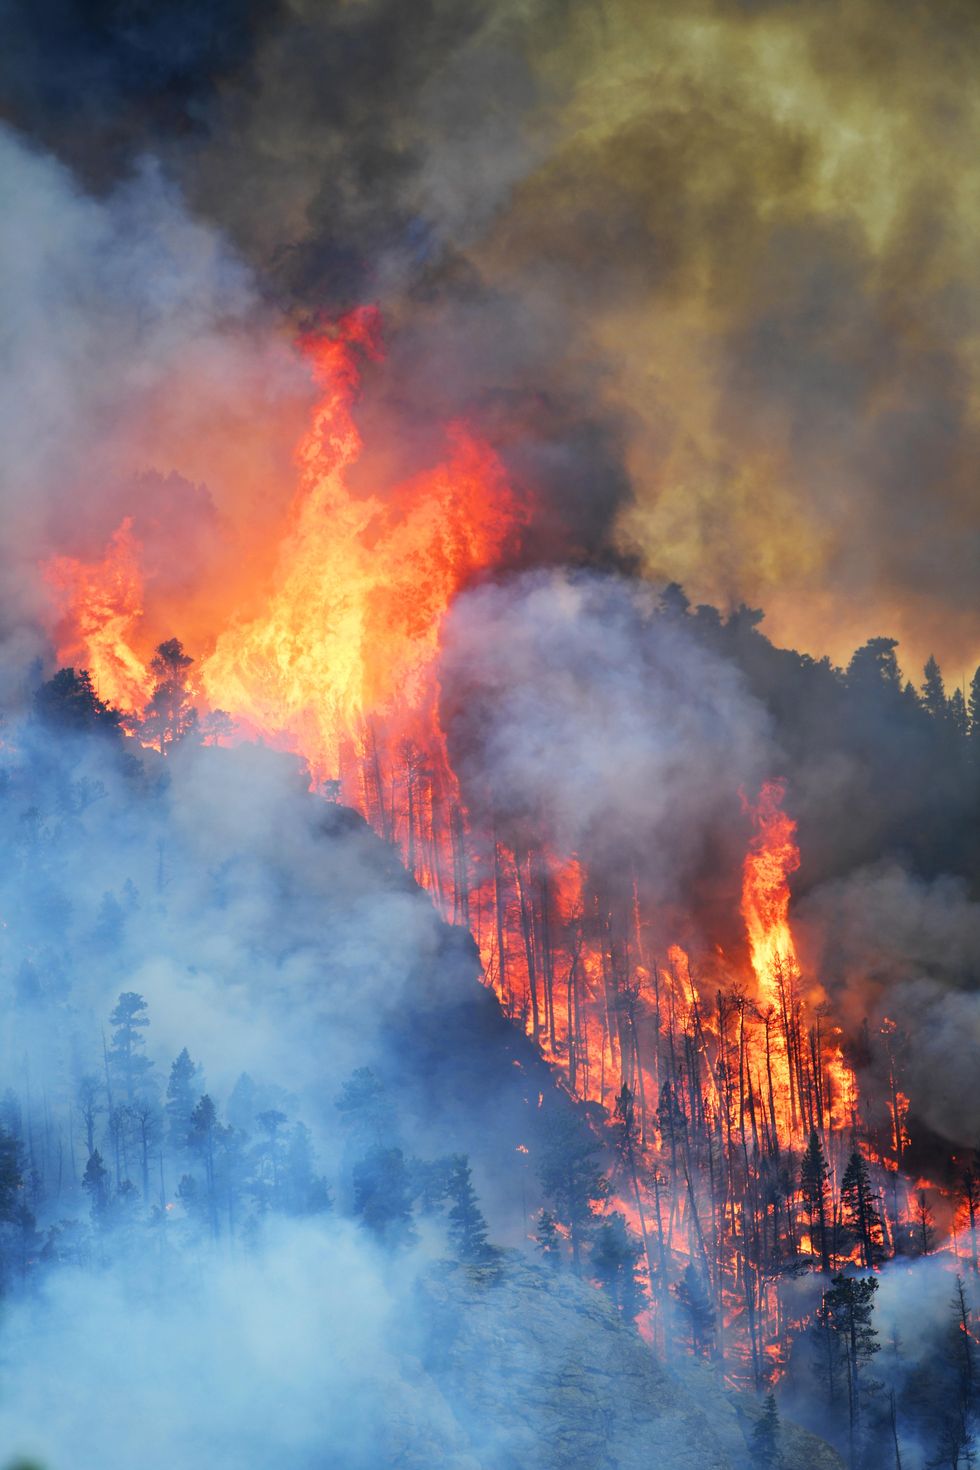 denver, colorado   july 13 a wildfire burning in the evergreen area of jefferson county on july 13, 2020 in denver, colorado photo by  rj sangostimedianews groupthe denver post via getty images